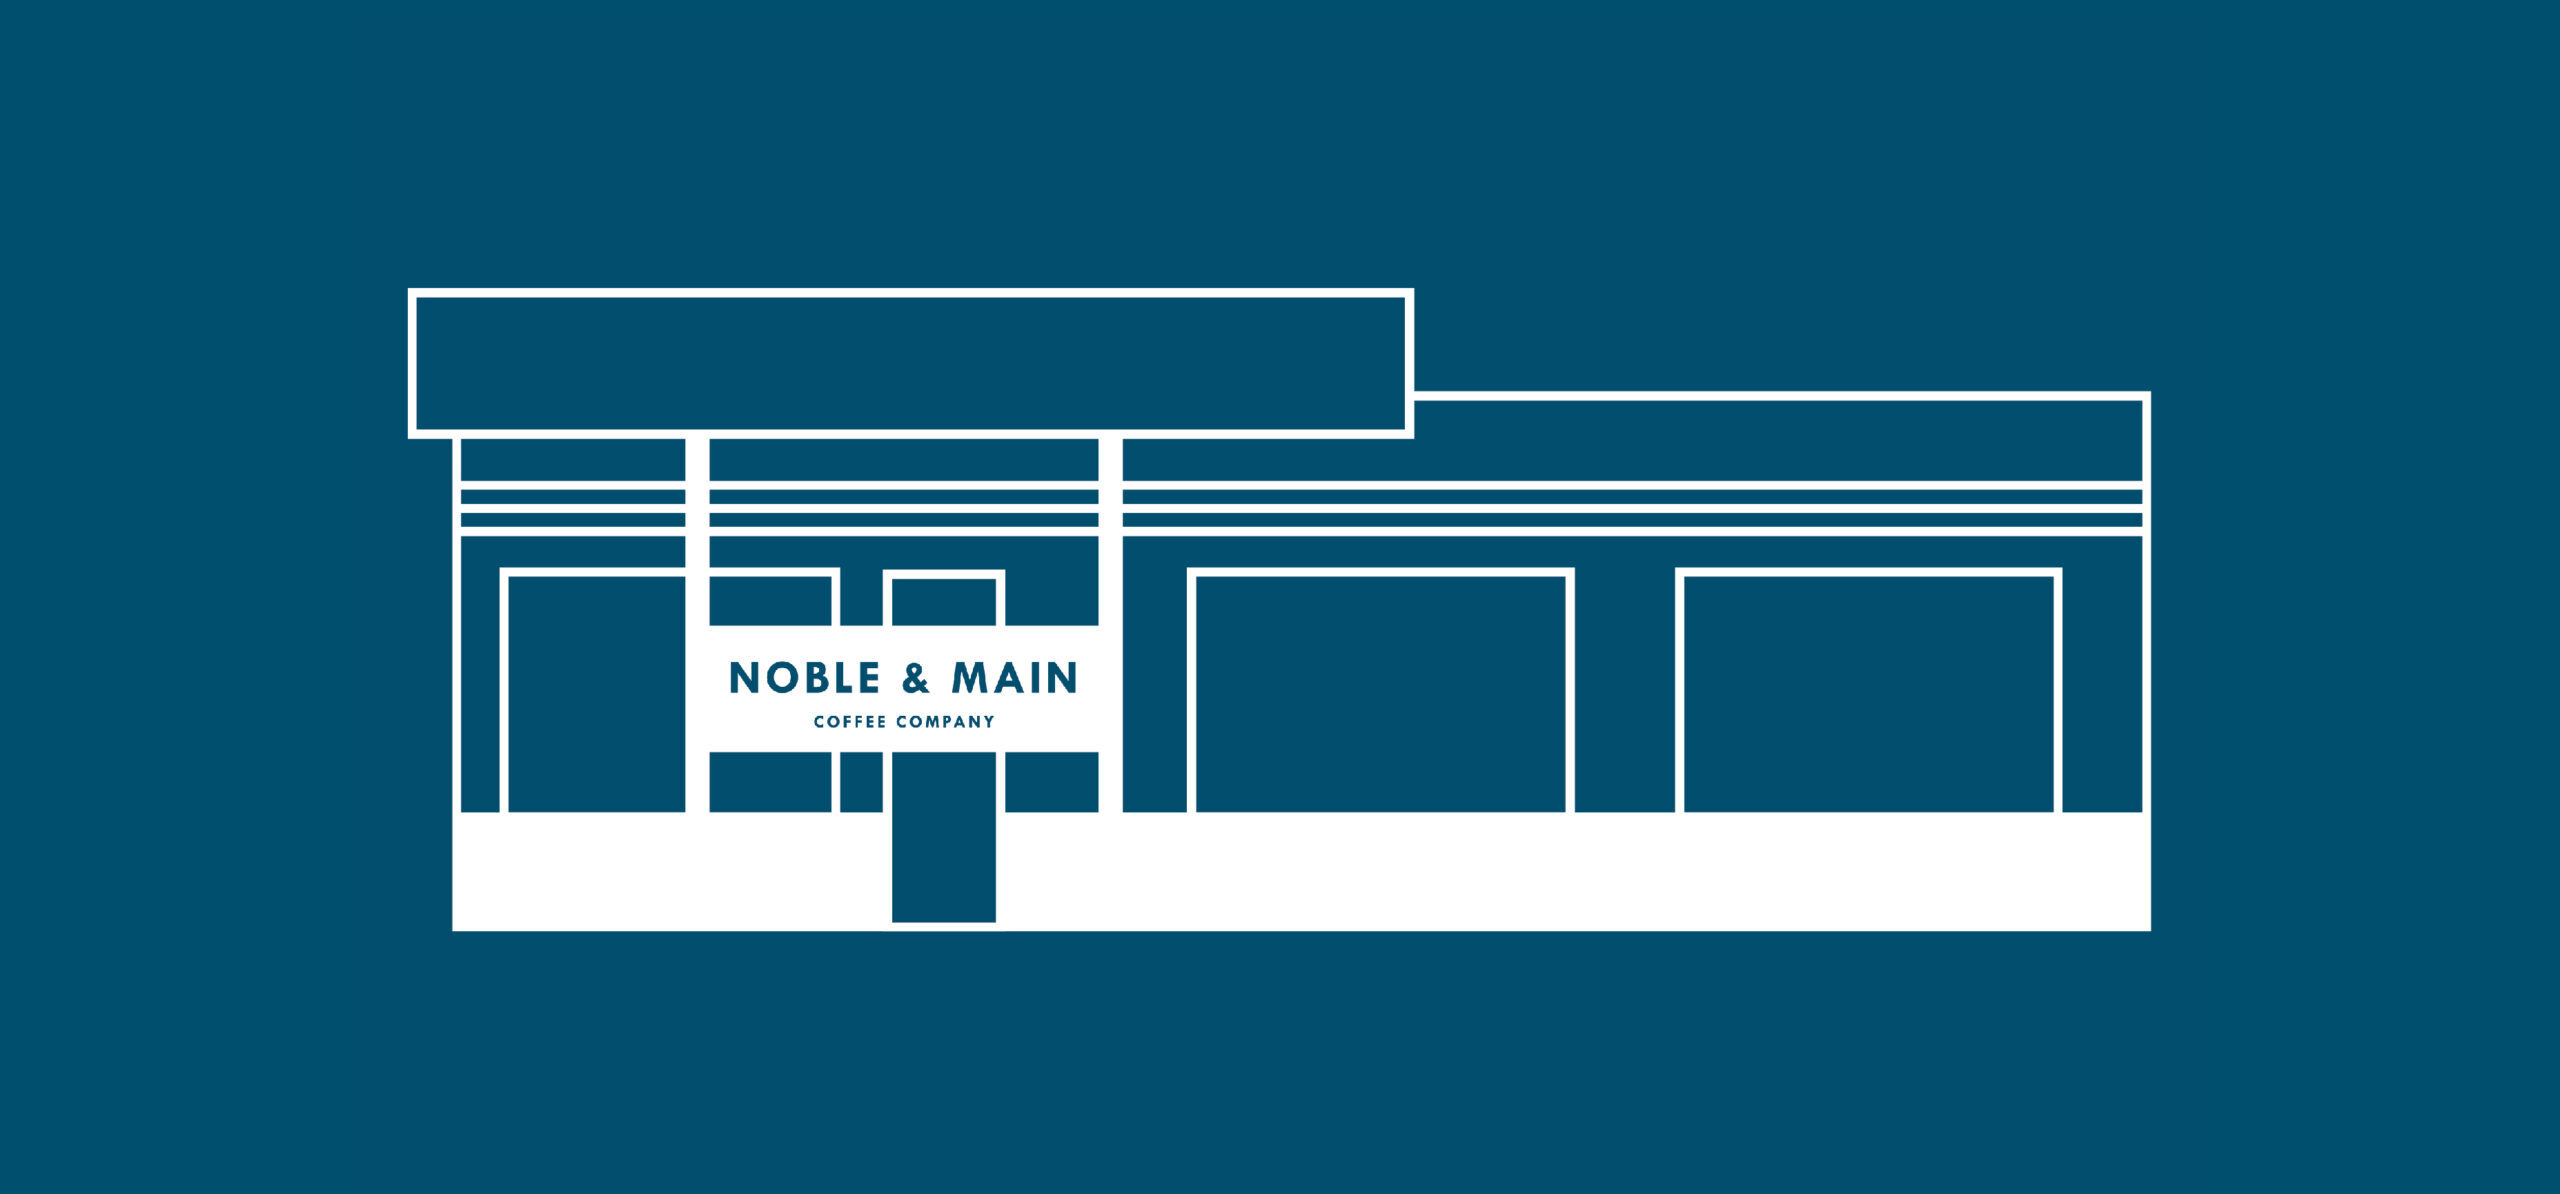 Hand-Drawn Illustration of Noble & Main Coffee Shop